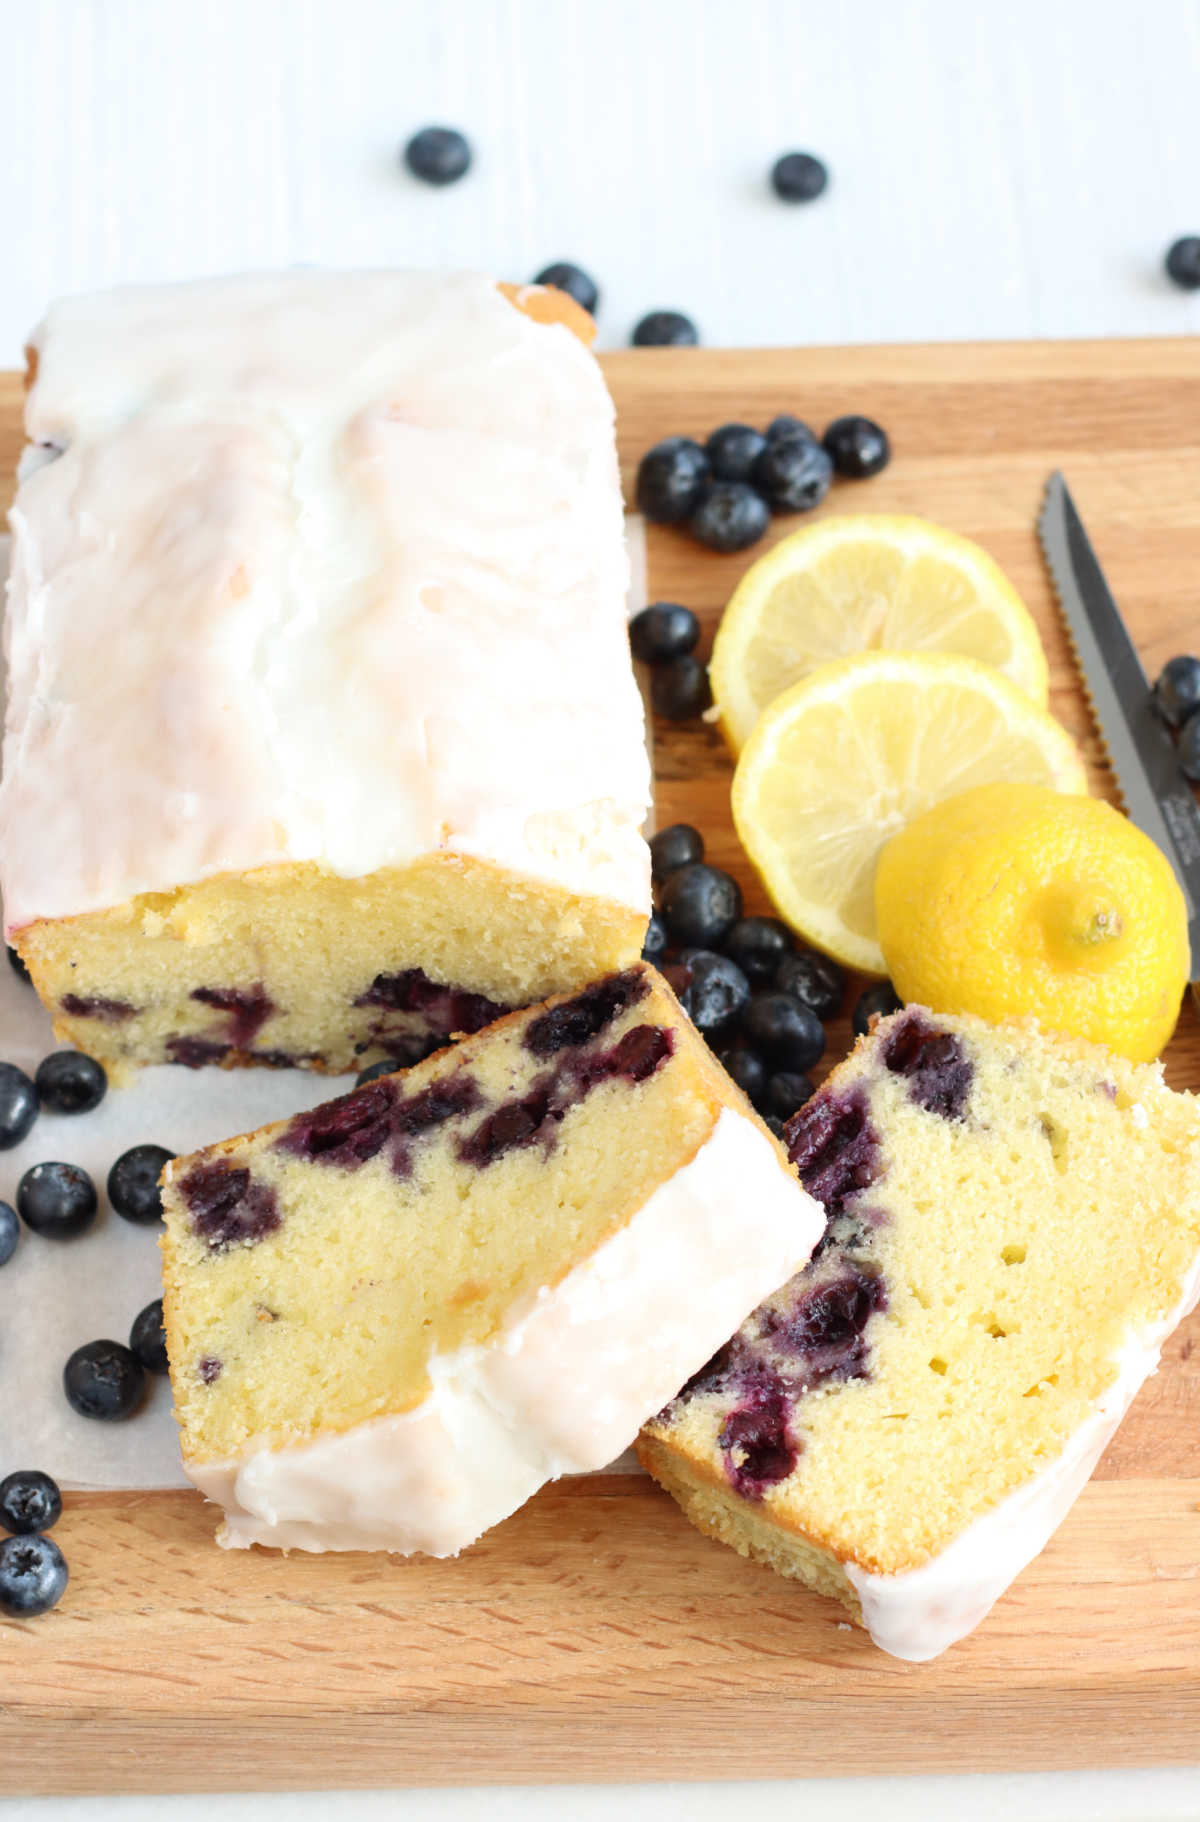 Lemon loaf cake with blueberries on wooden cutting board, lemon slices to right.